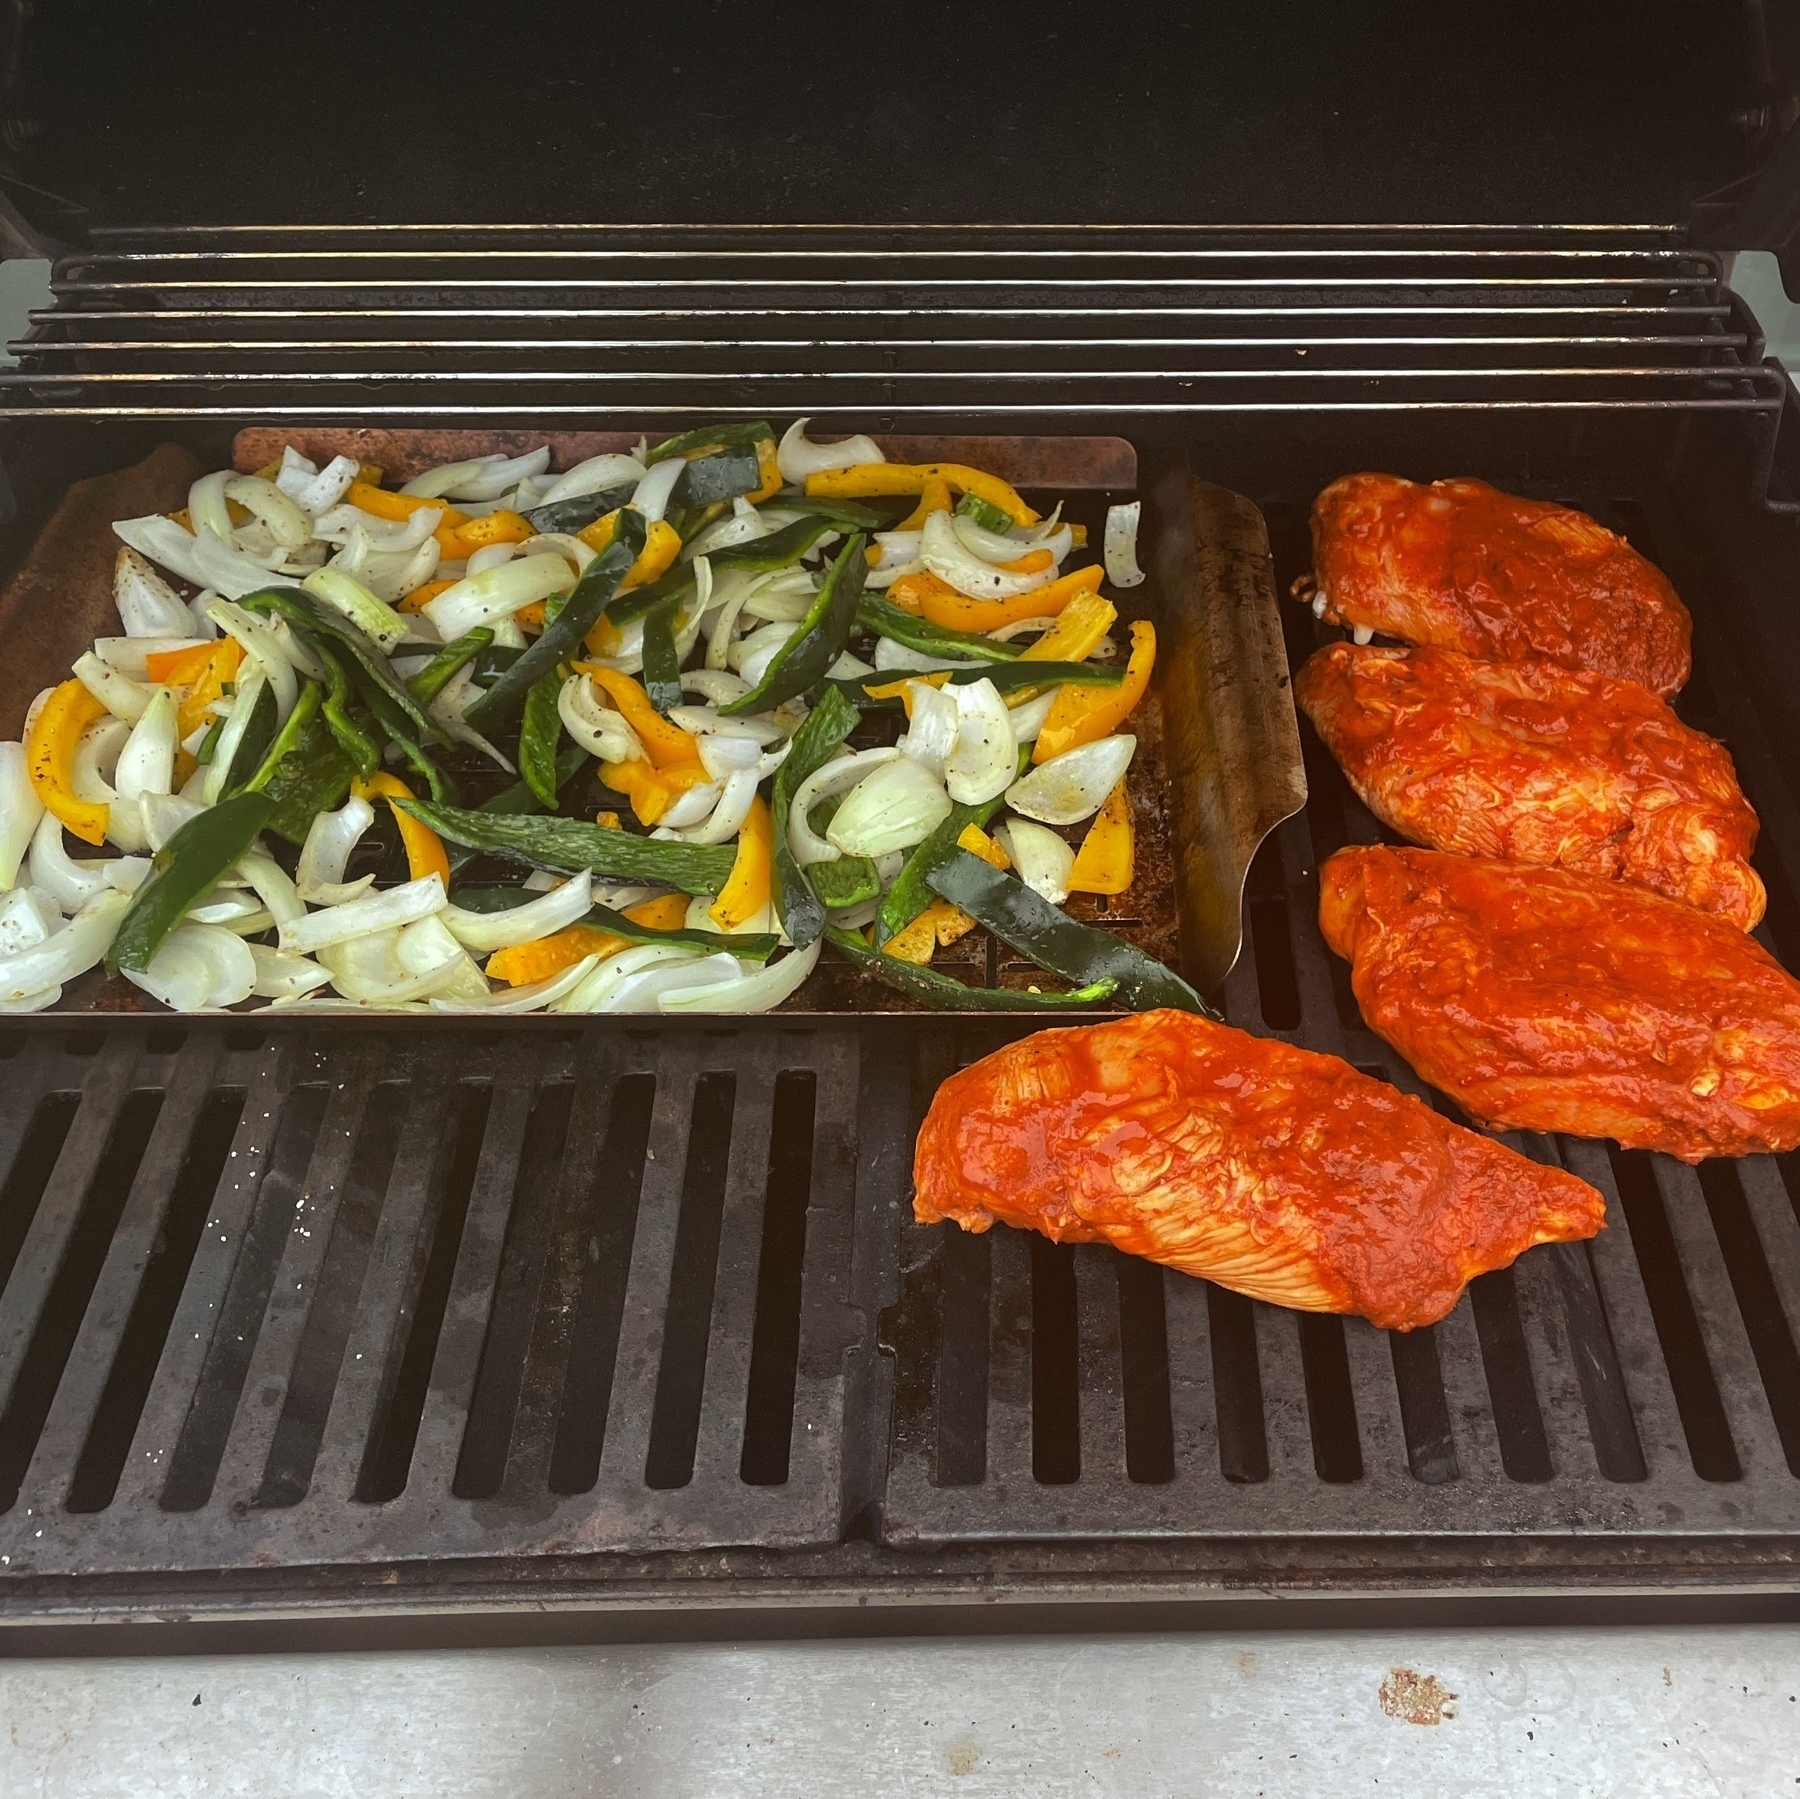 Chicken and veggies on the grill.